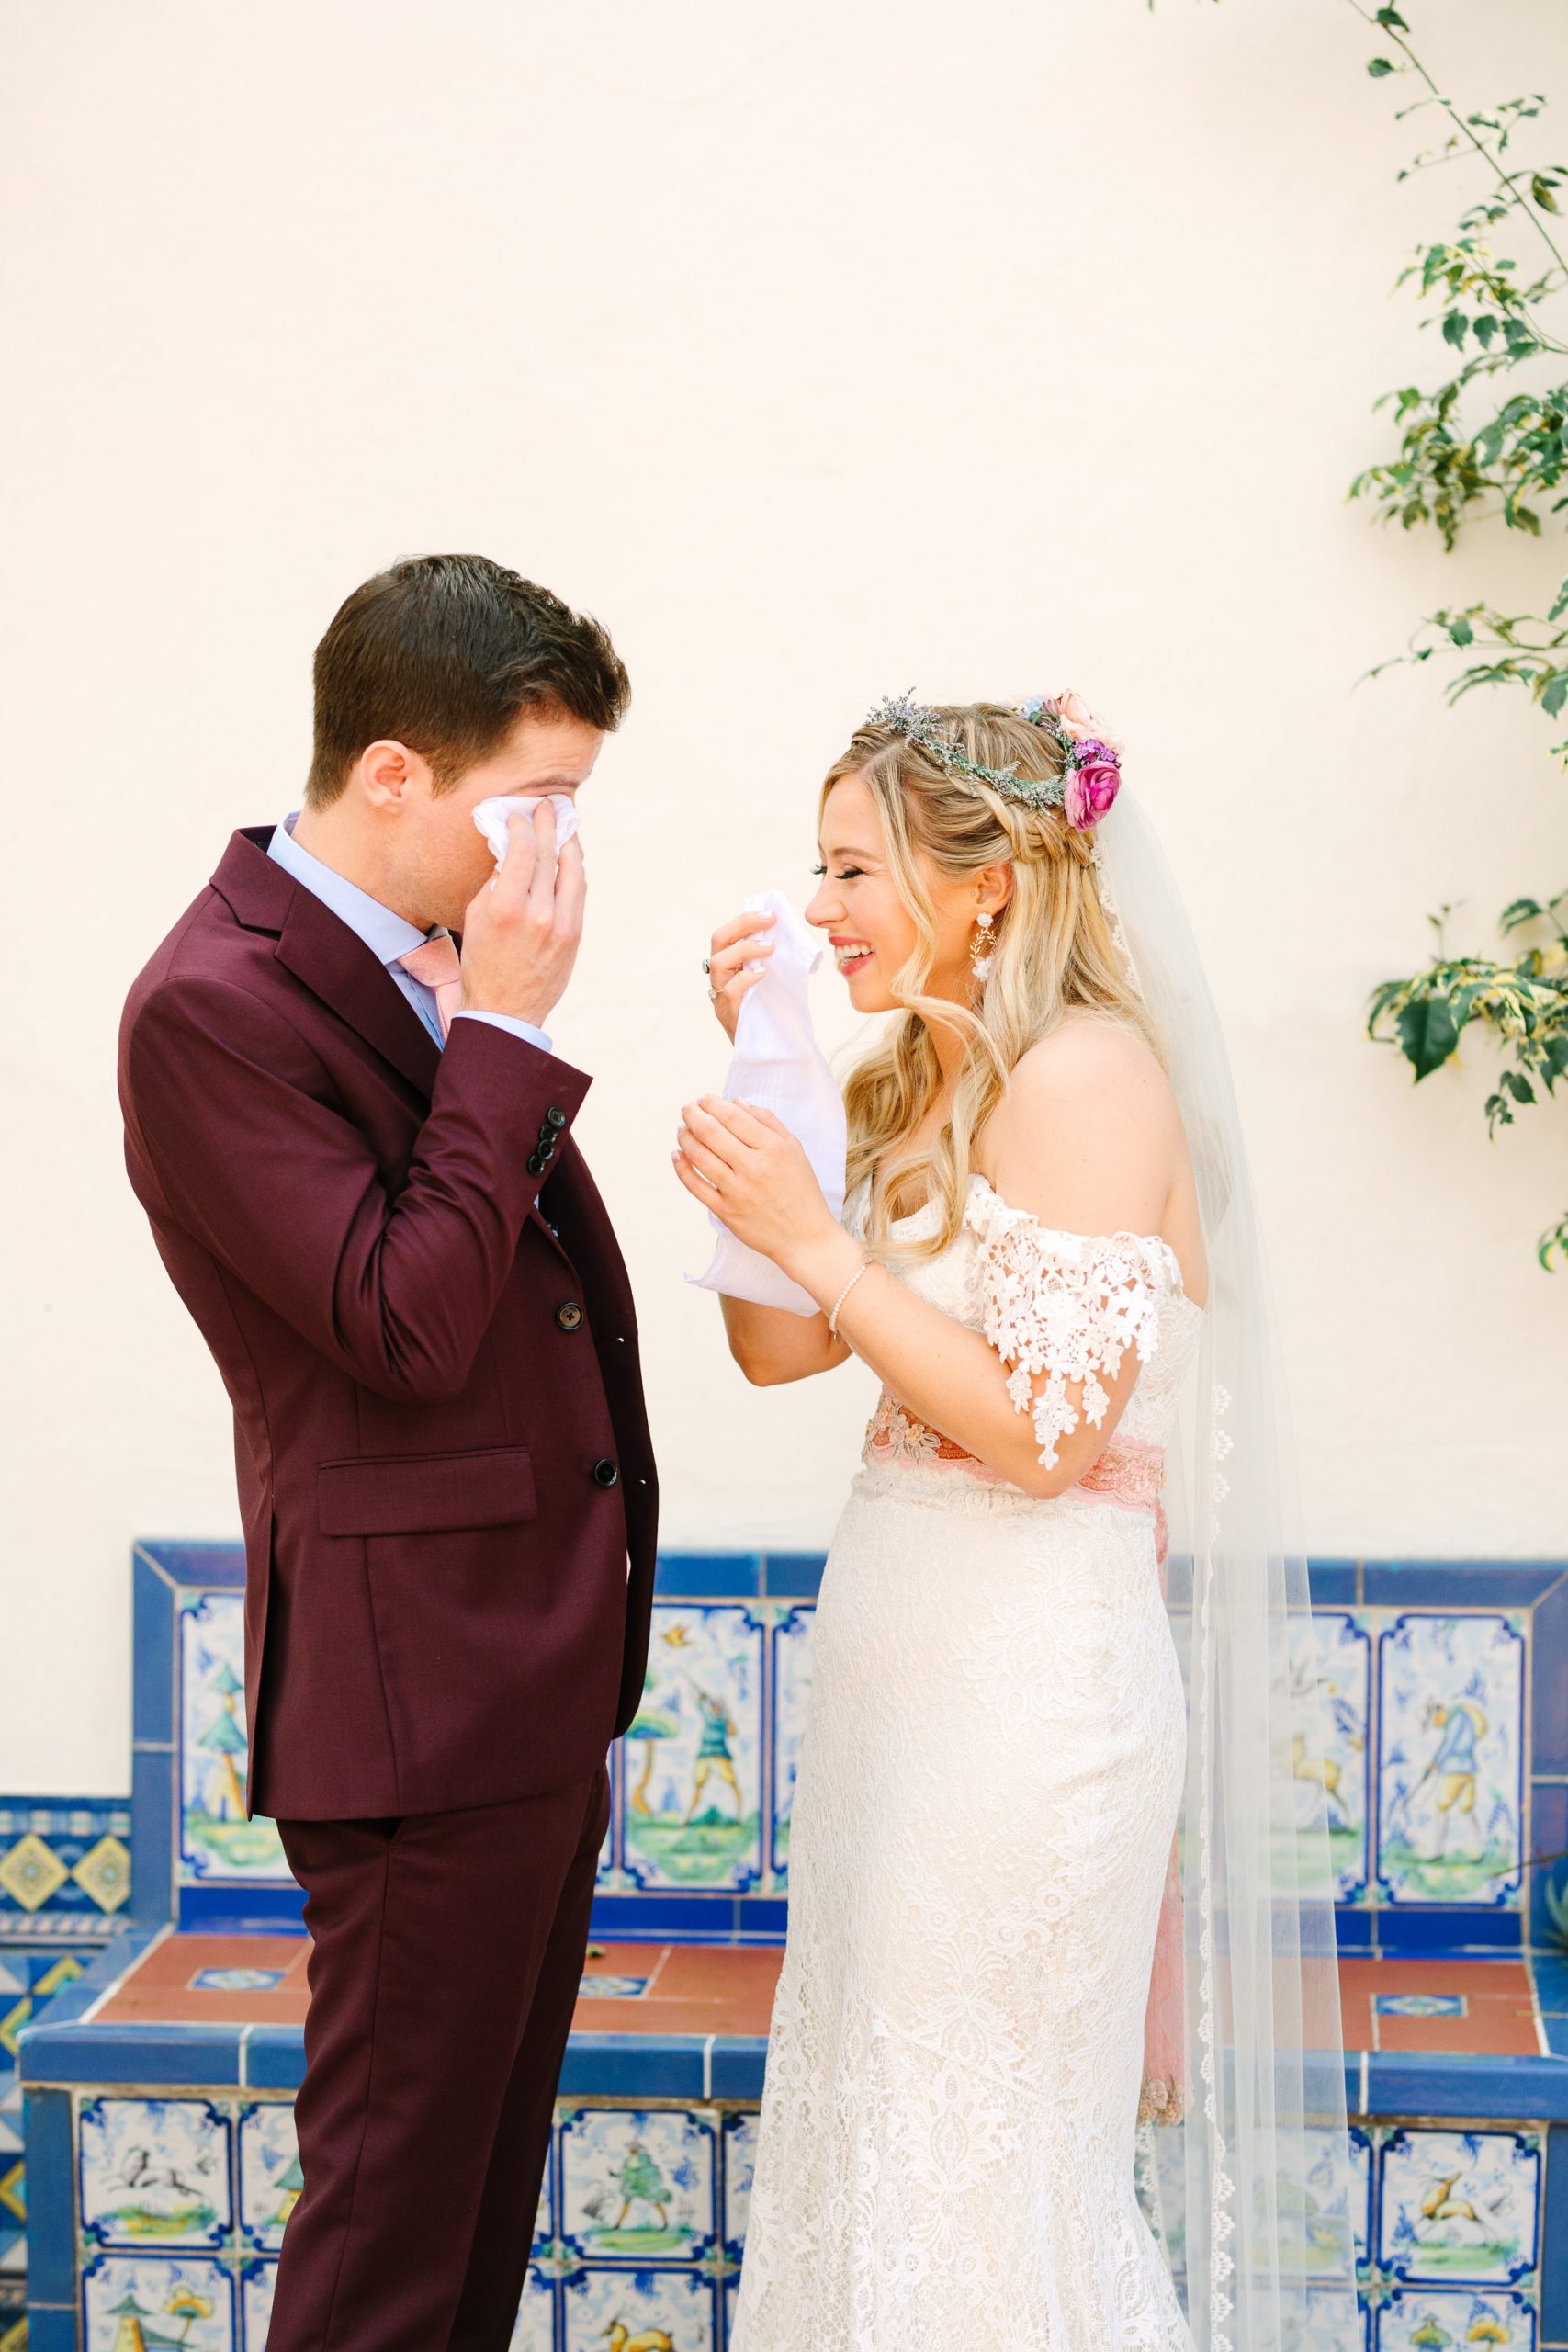 First look at wedding by Mary Costa Photography